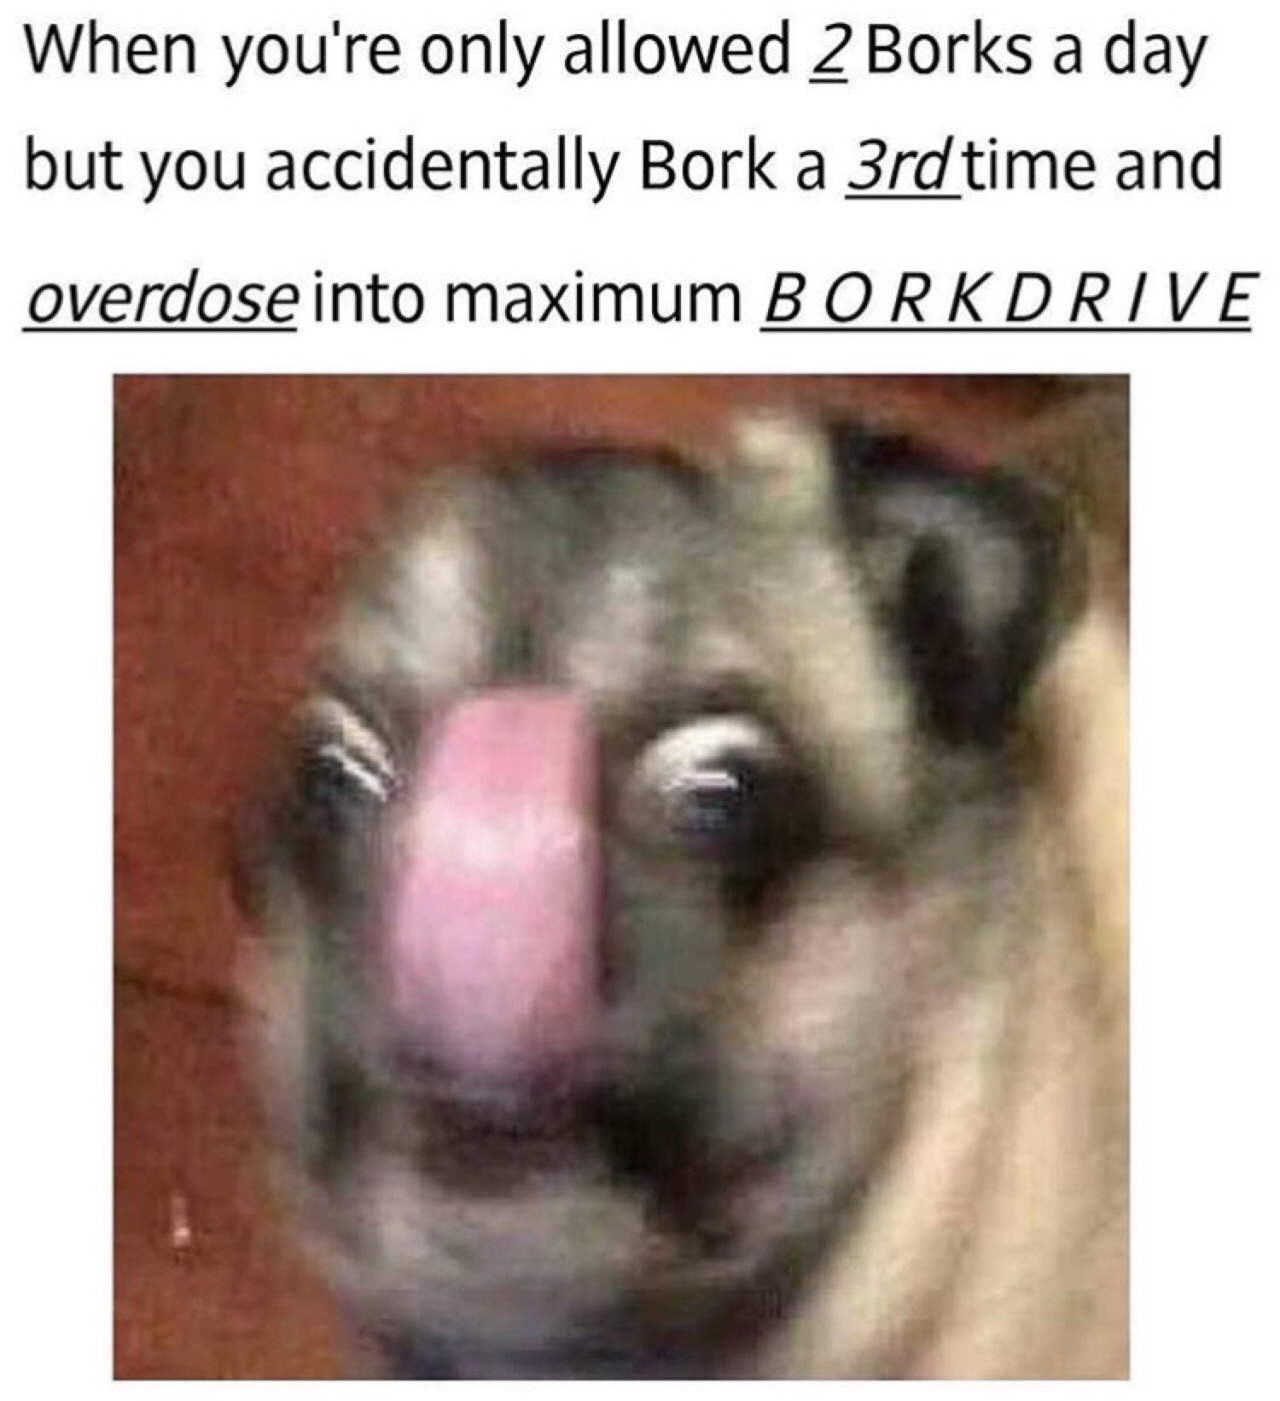 memes - maximum borkdrive - When you're only allowed 2 Borks a day but you accidentally Bork a 3rd time and overdose into maximum Borkdrive